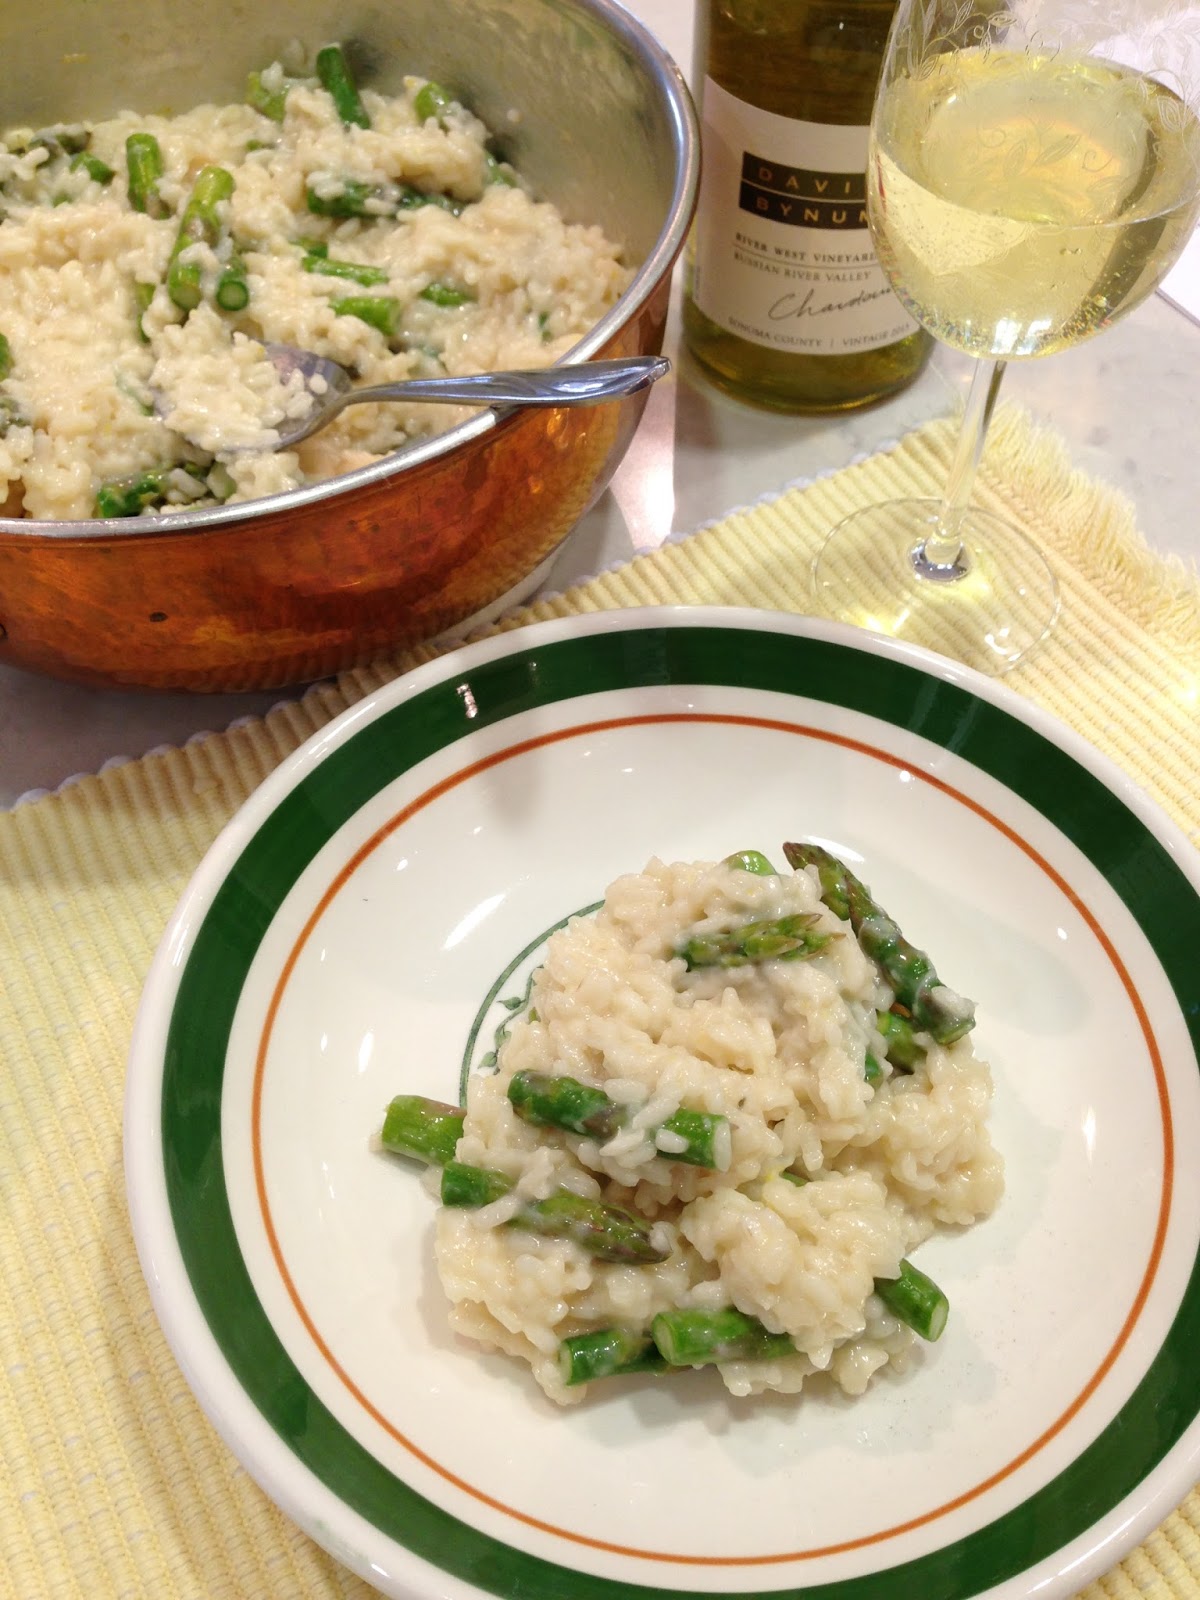 Accounting For All My Blessings: Creamy Lemon Risotto with Asparagus